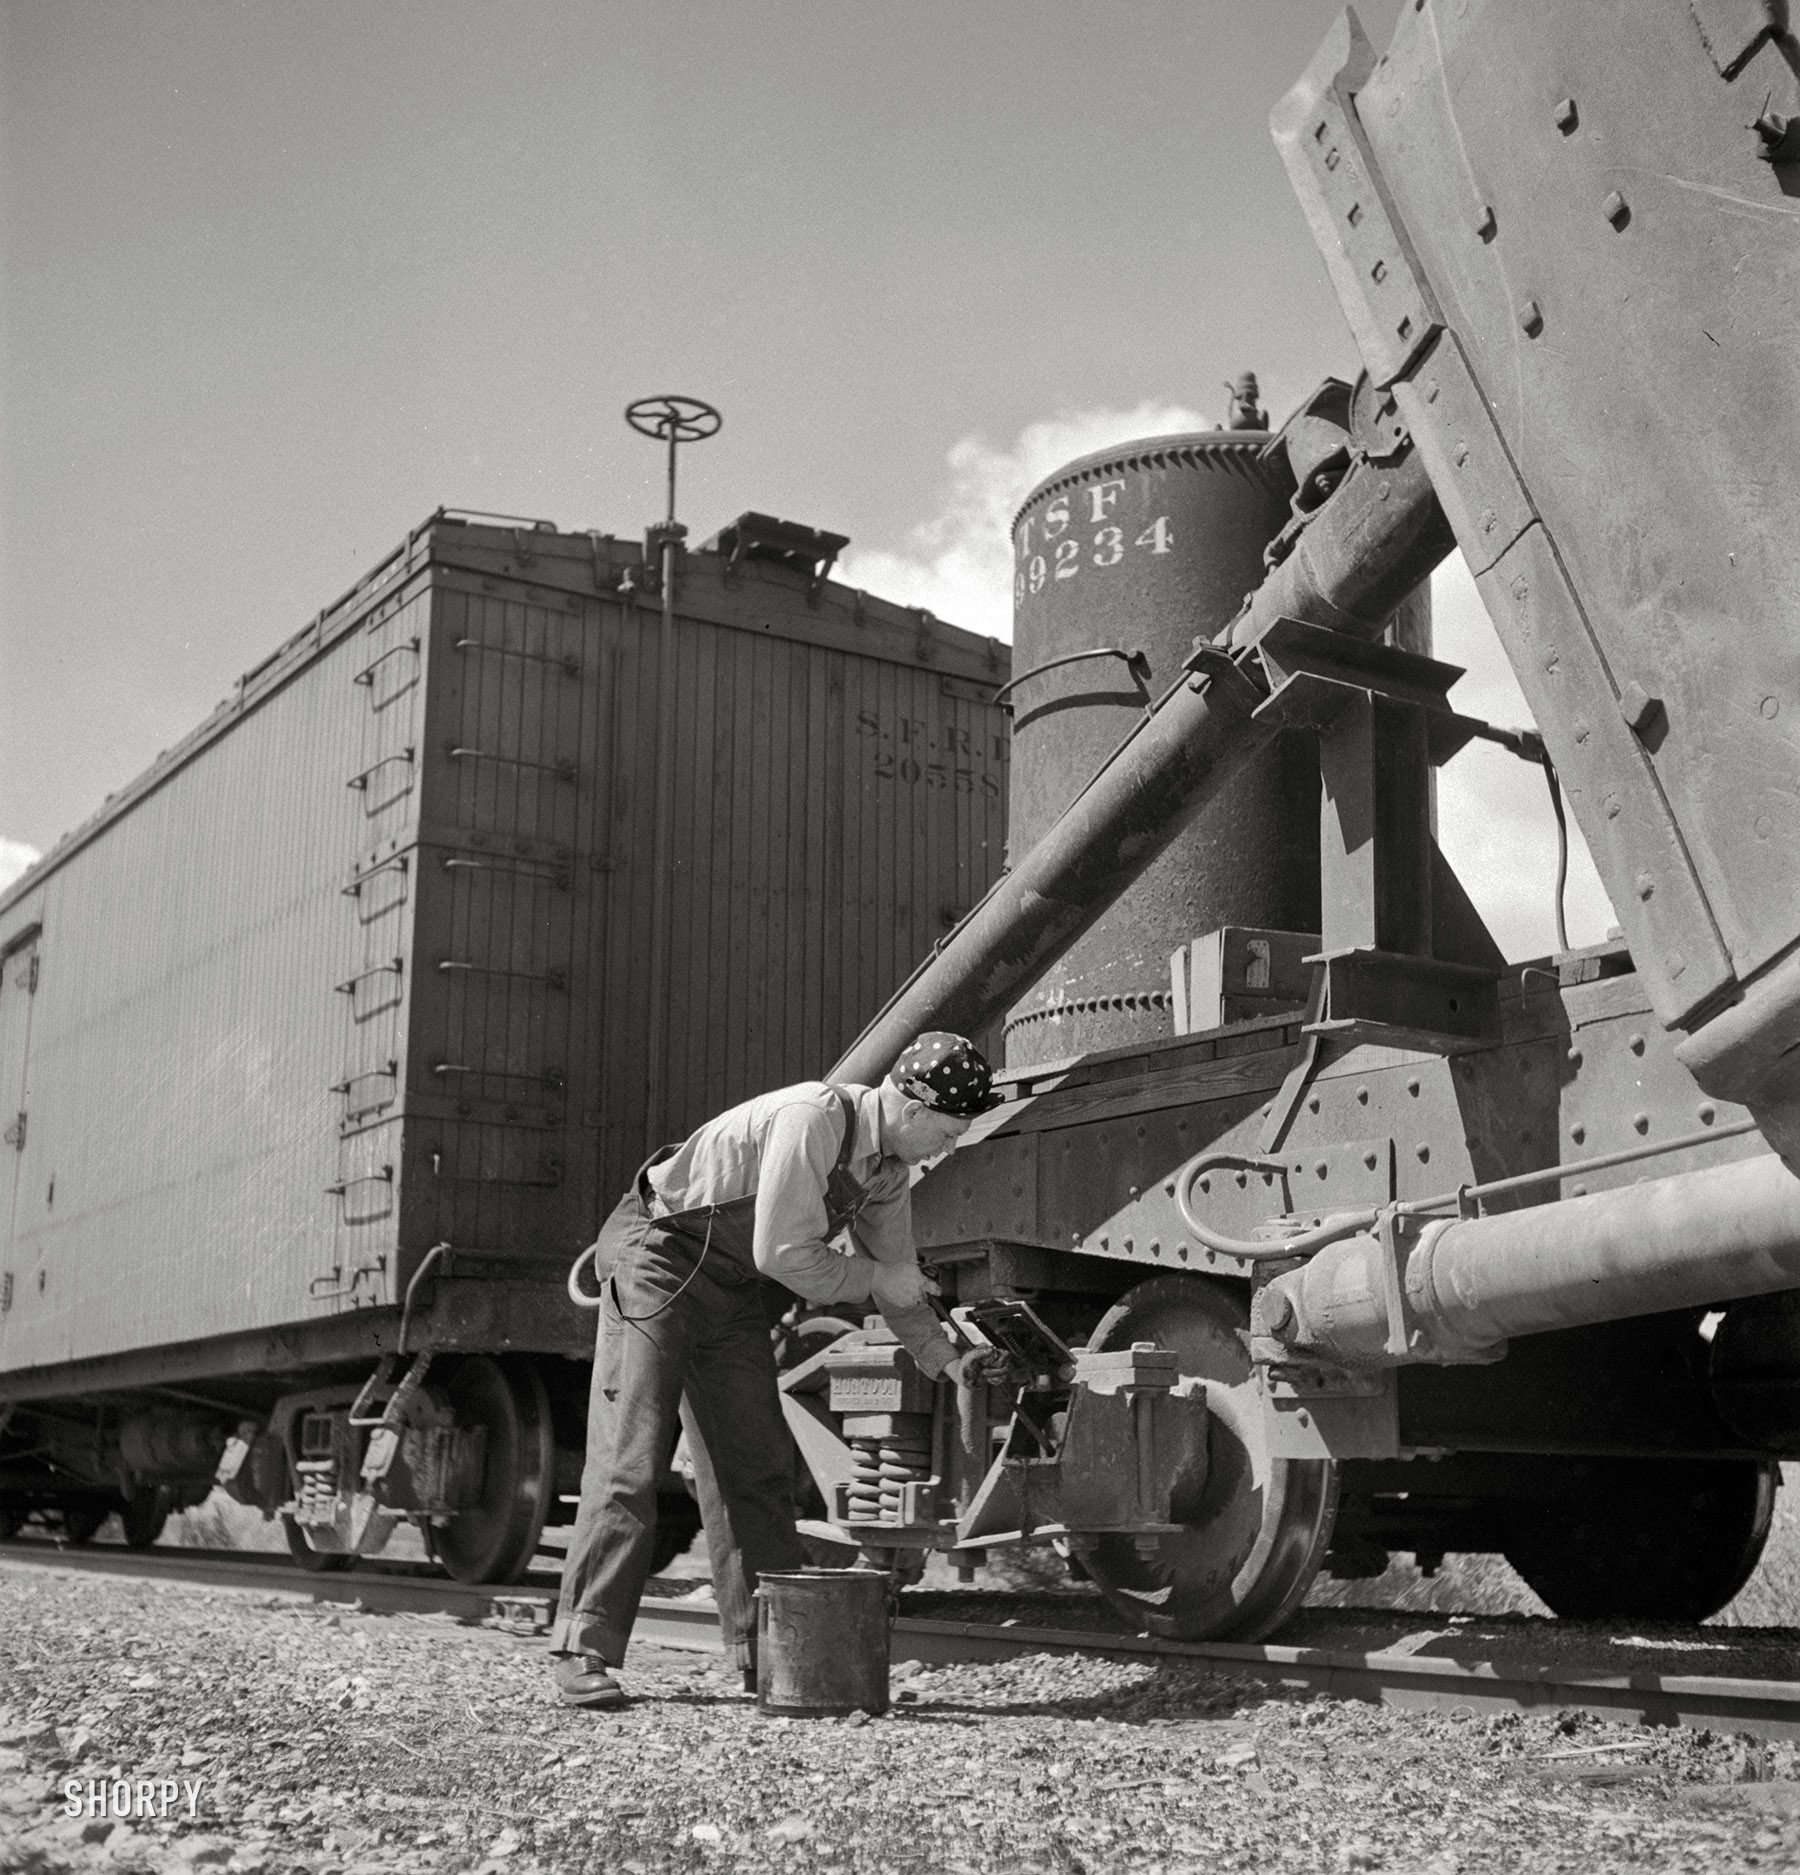 March 1943. "Acomita, New Mexico. Brakeman R.E. Capsey repacking a journal box of a special car as the train on the Atchison, Topeka & Santa Fe Railroad between Belen and Gallup, New Mexico, waits on a siding." Medium-format negative by Jack Delano for the Office of War Information. View full size.